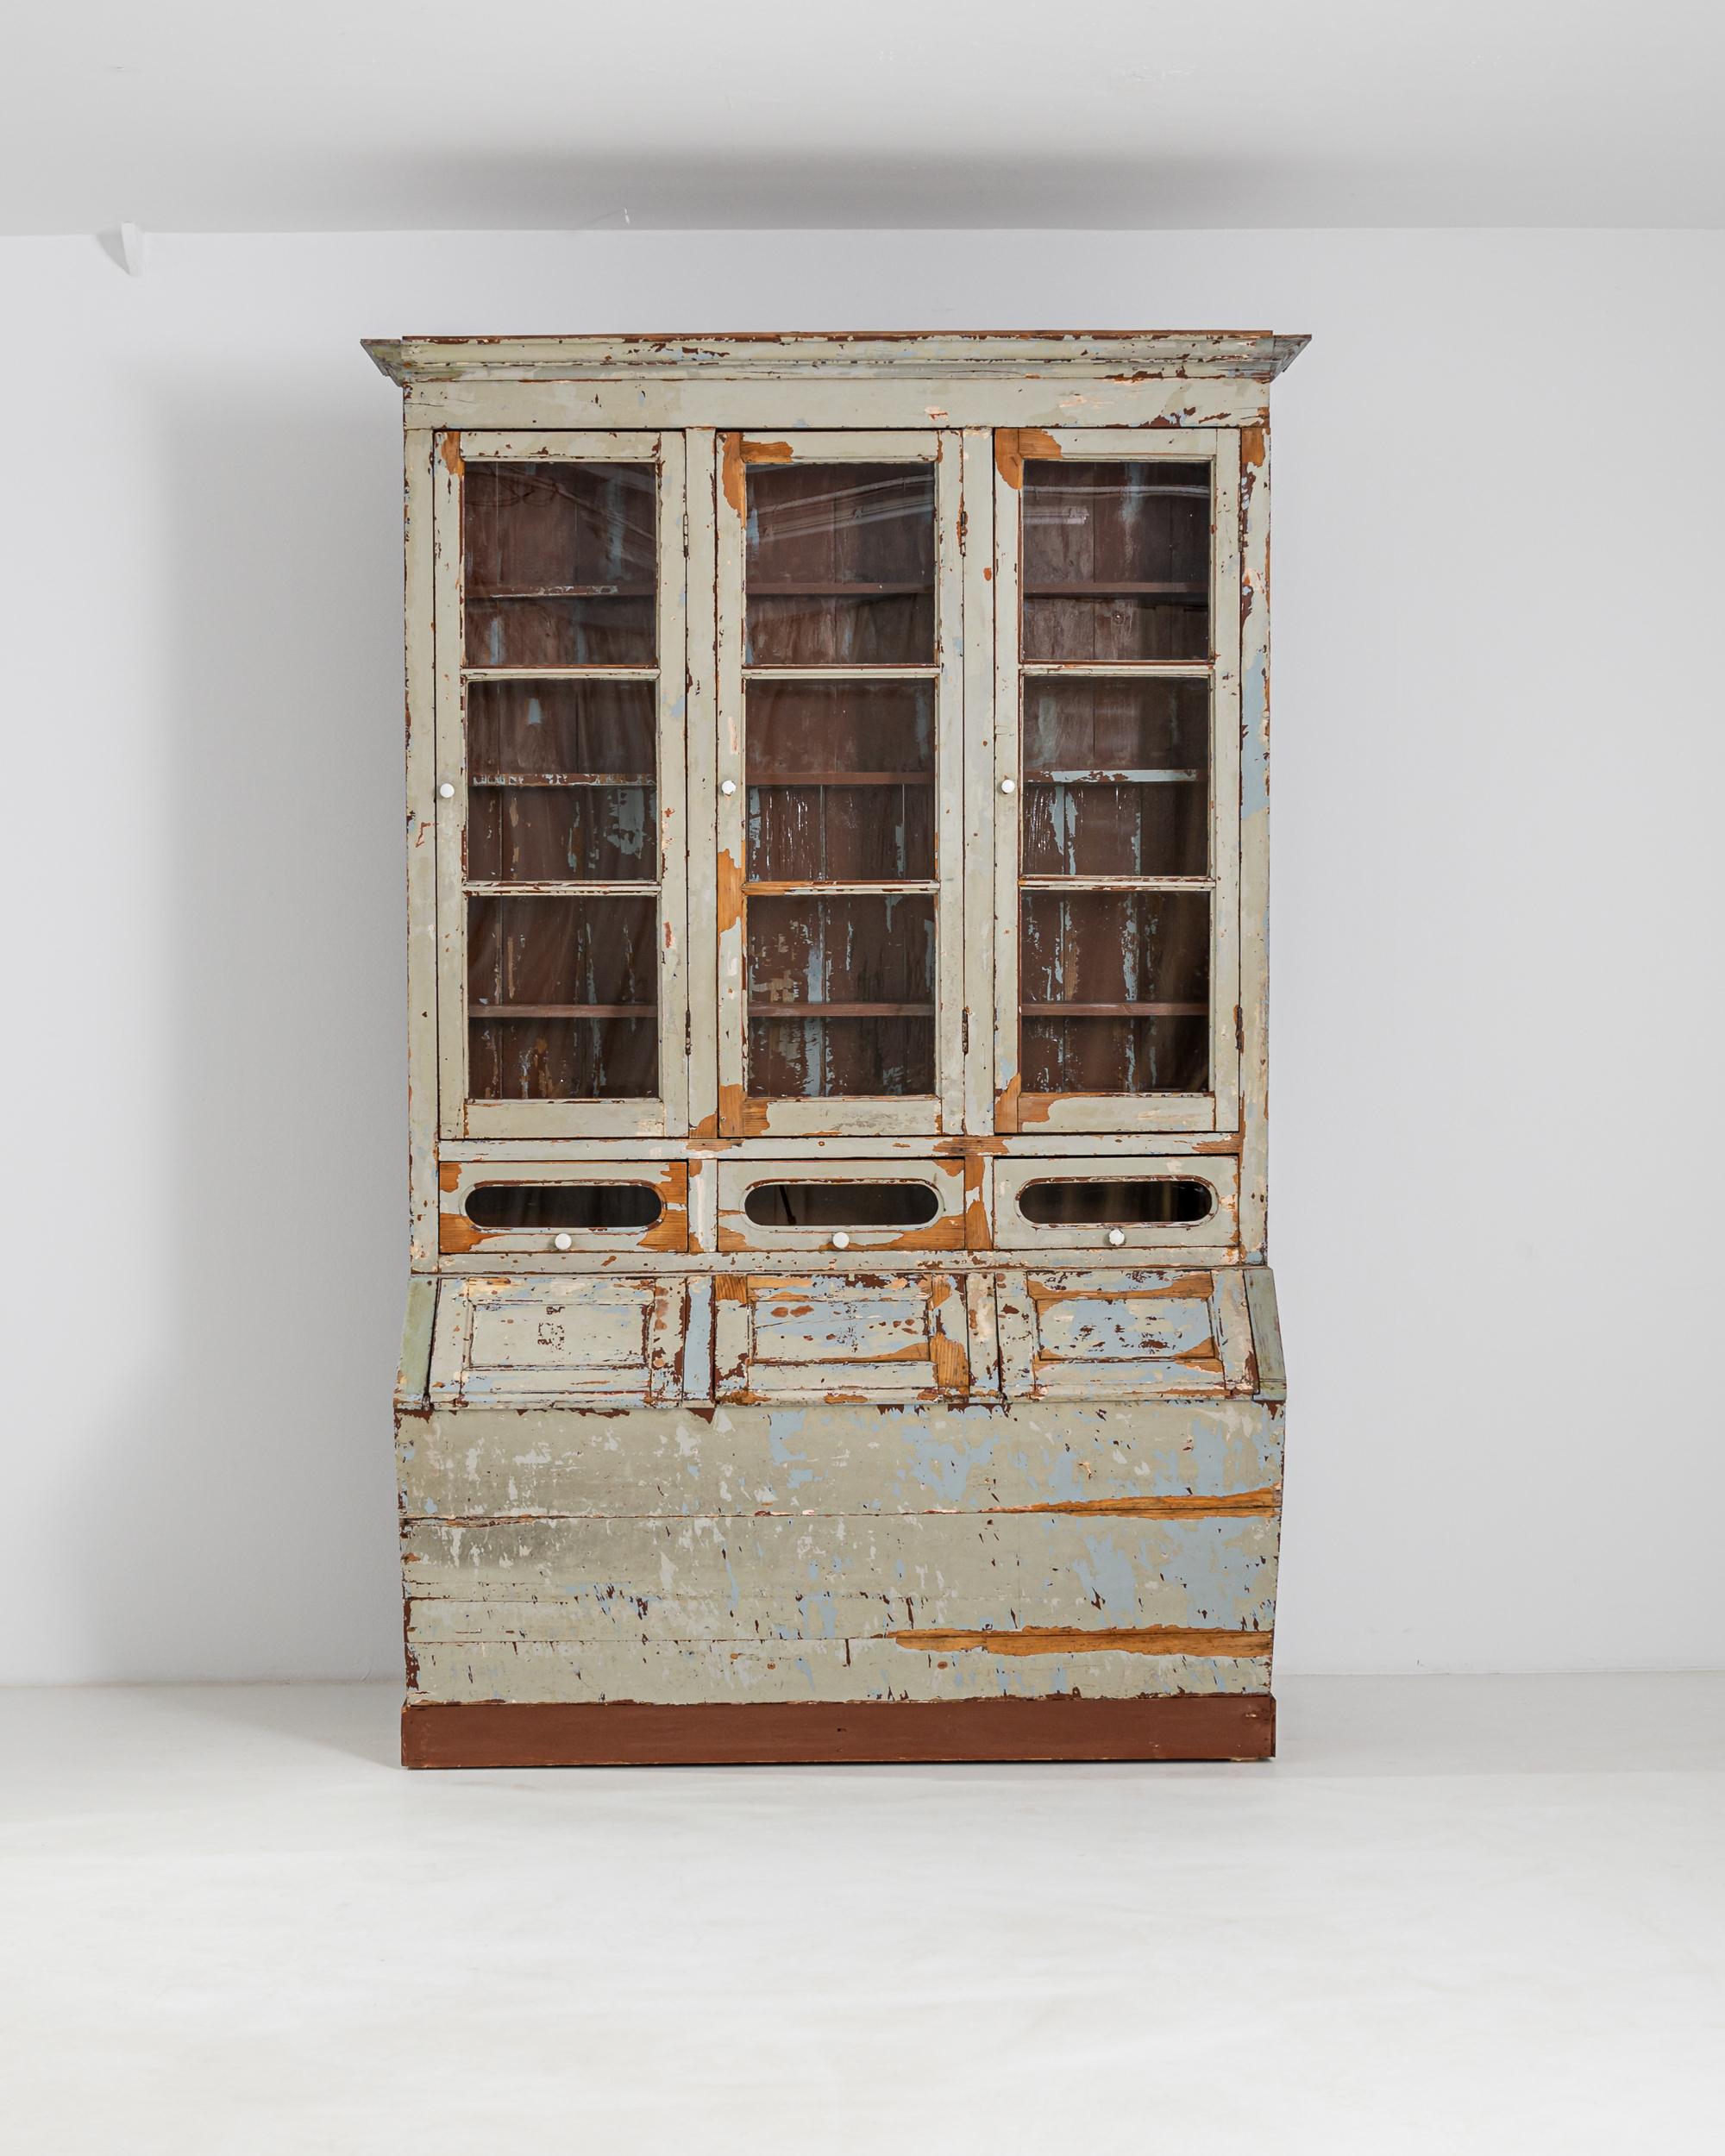 The unusual shape and evocative patina of this antique wooden vitrine makes it a find to treasure. Built in Portugal in the 19th century, the topcoat of the paint has weathered over the years to create a dynamic composition of lichen green, soft